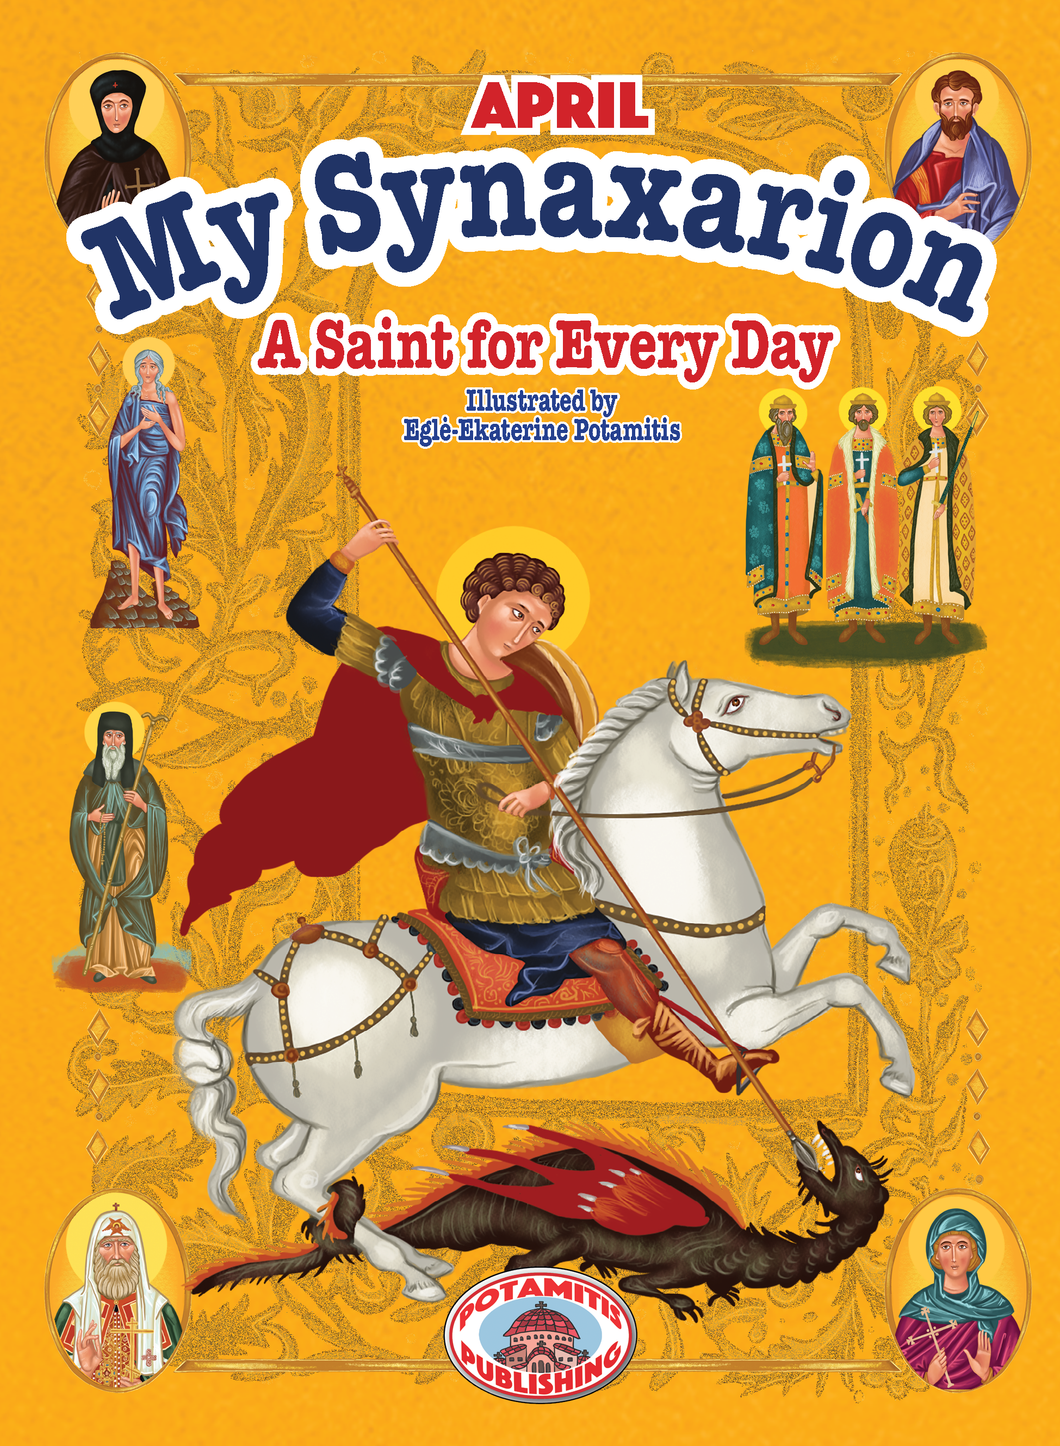 My Synaxarion – A Saint for Every Day – APRIL